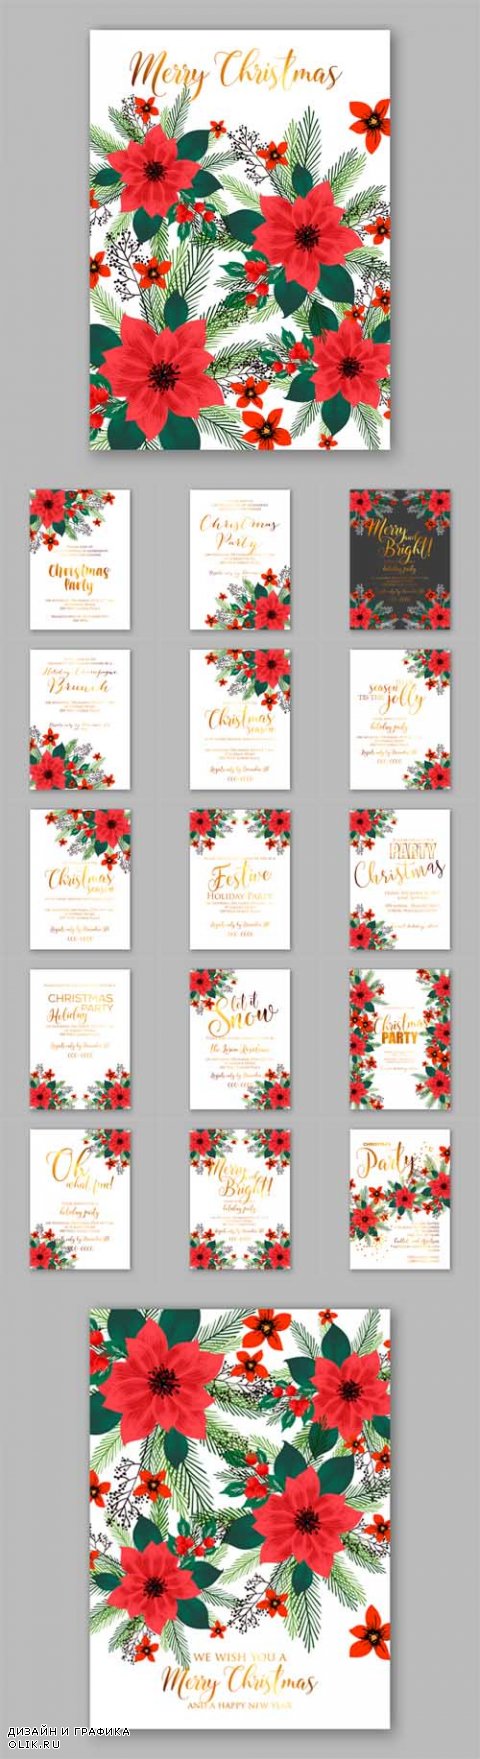 Vector Merry Christmas Party Invitations with Winter Wreath